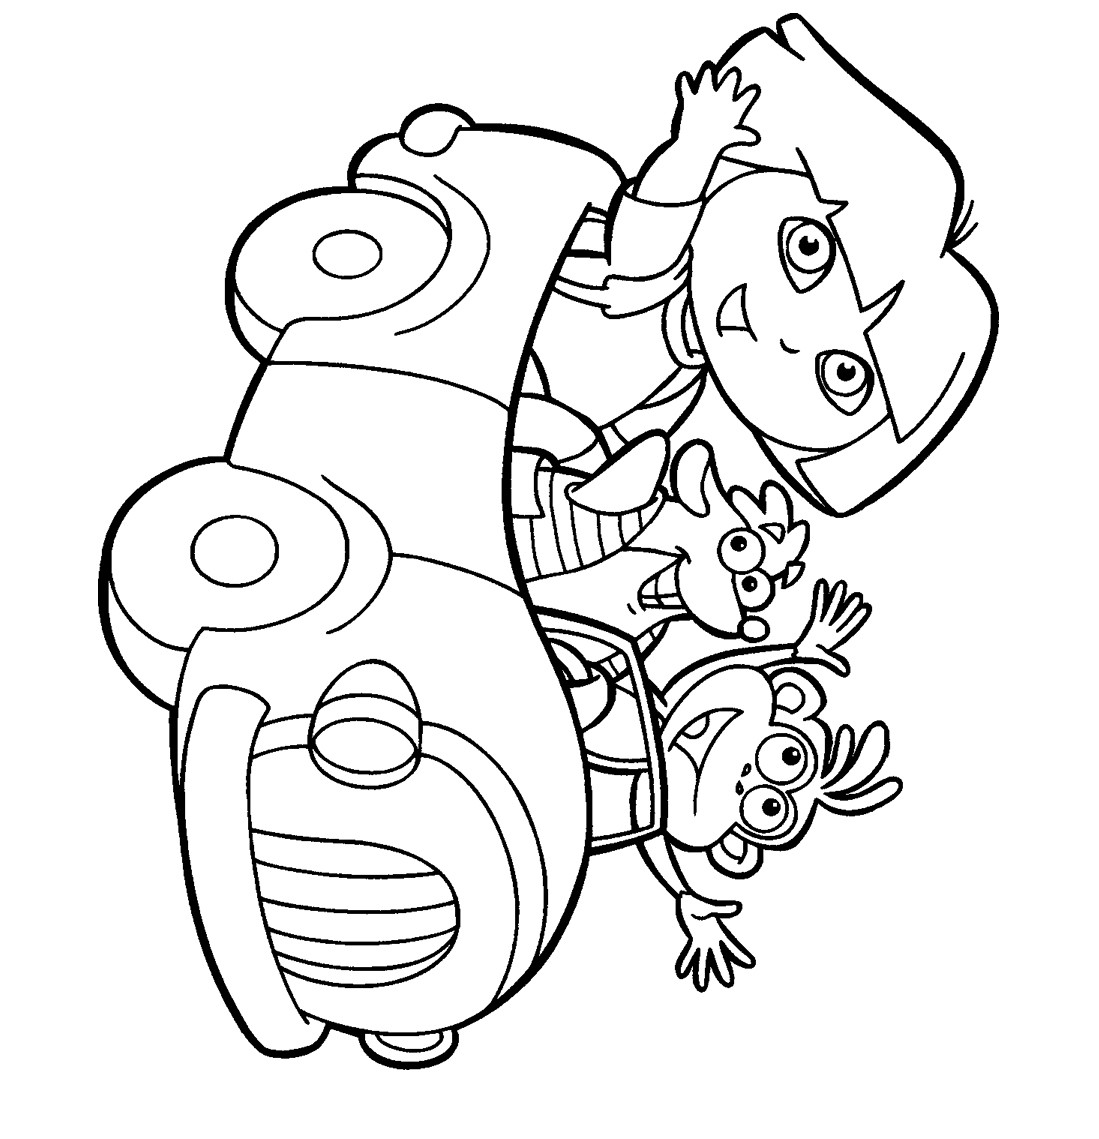 Toddler Coloring Pages
 Printable coloring pages for kids